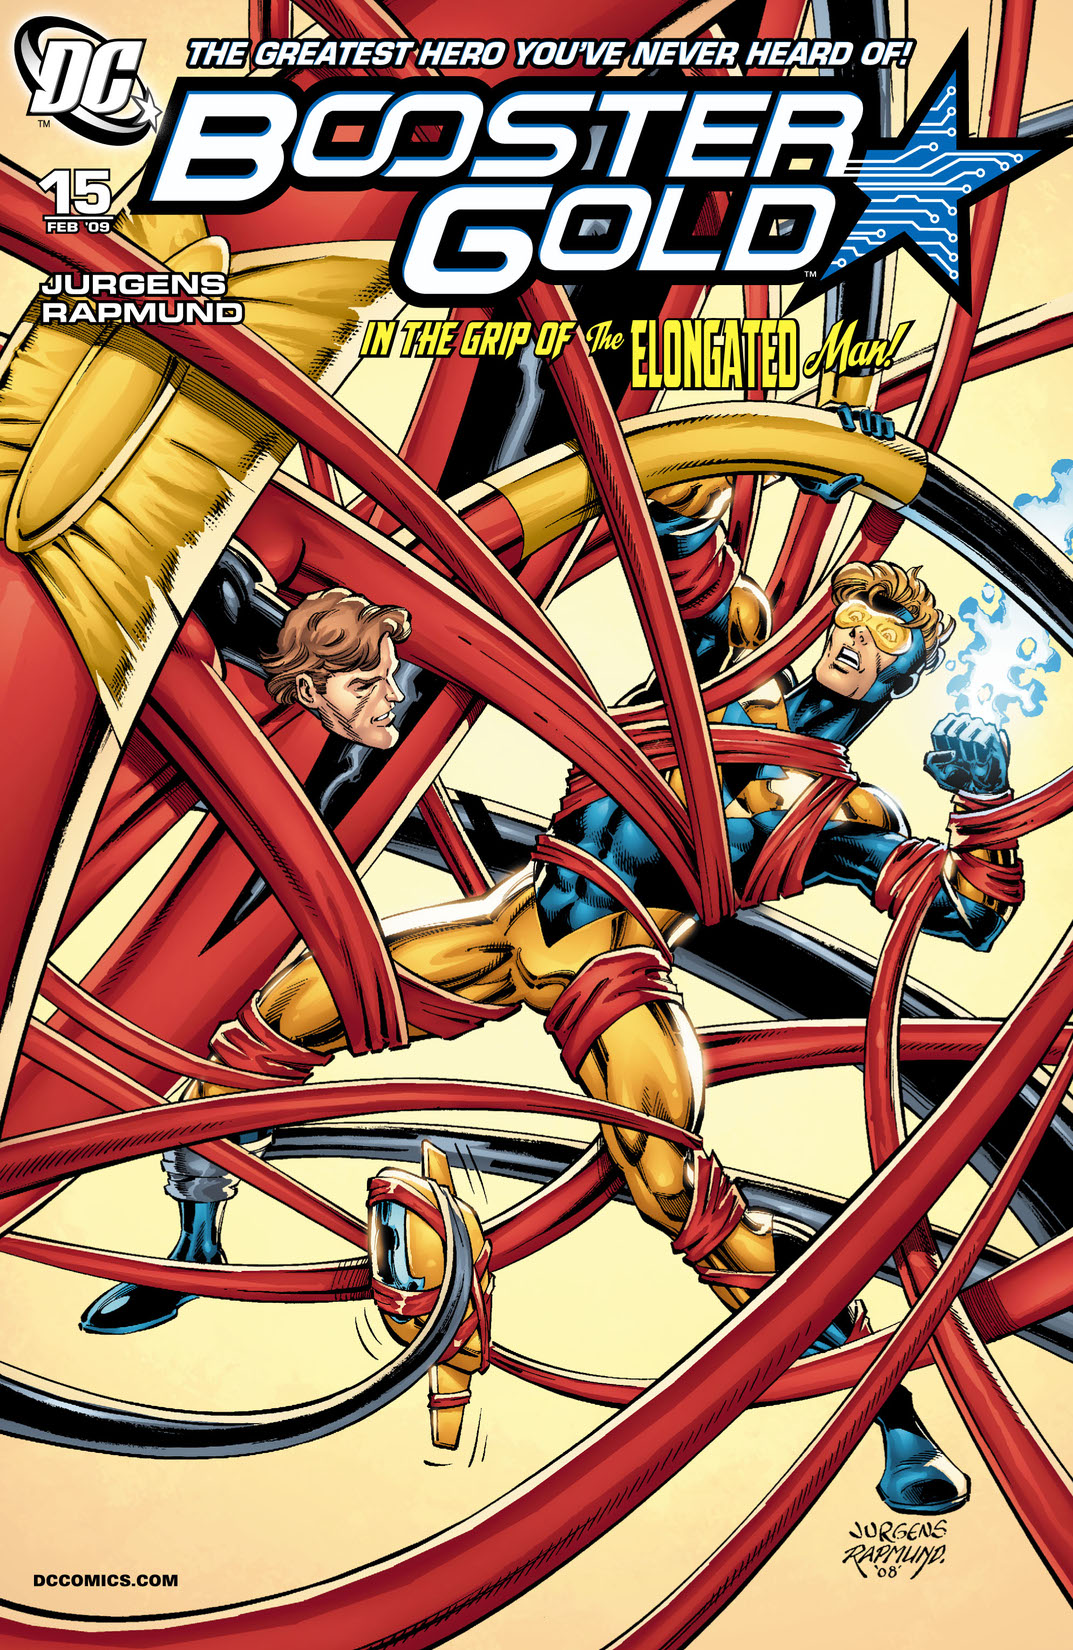 Booster Gold (2007-) #15 preview images